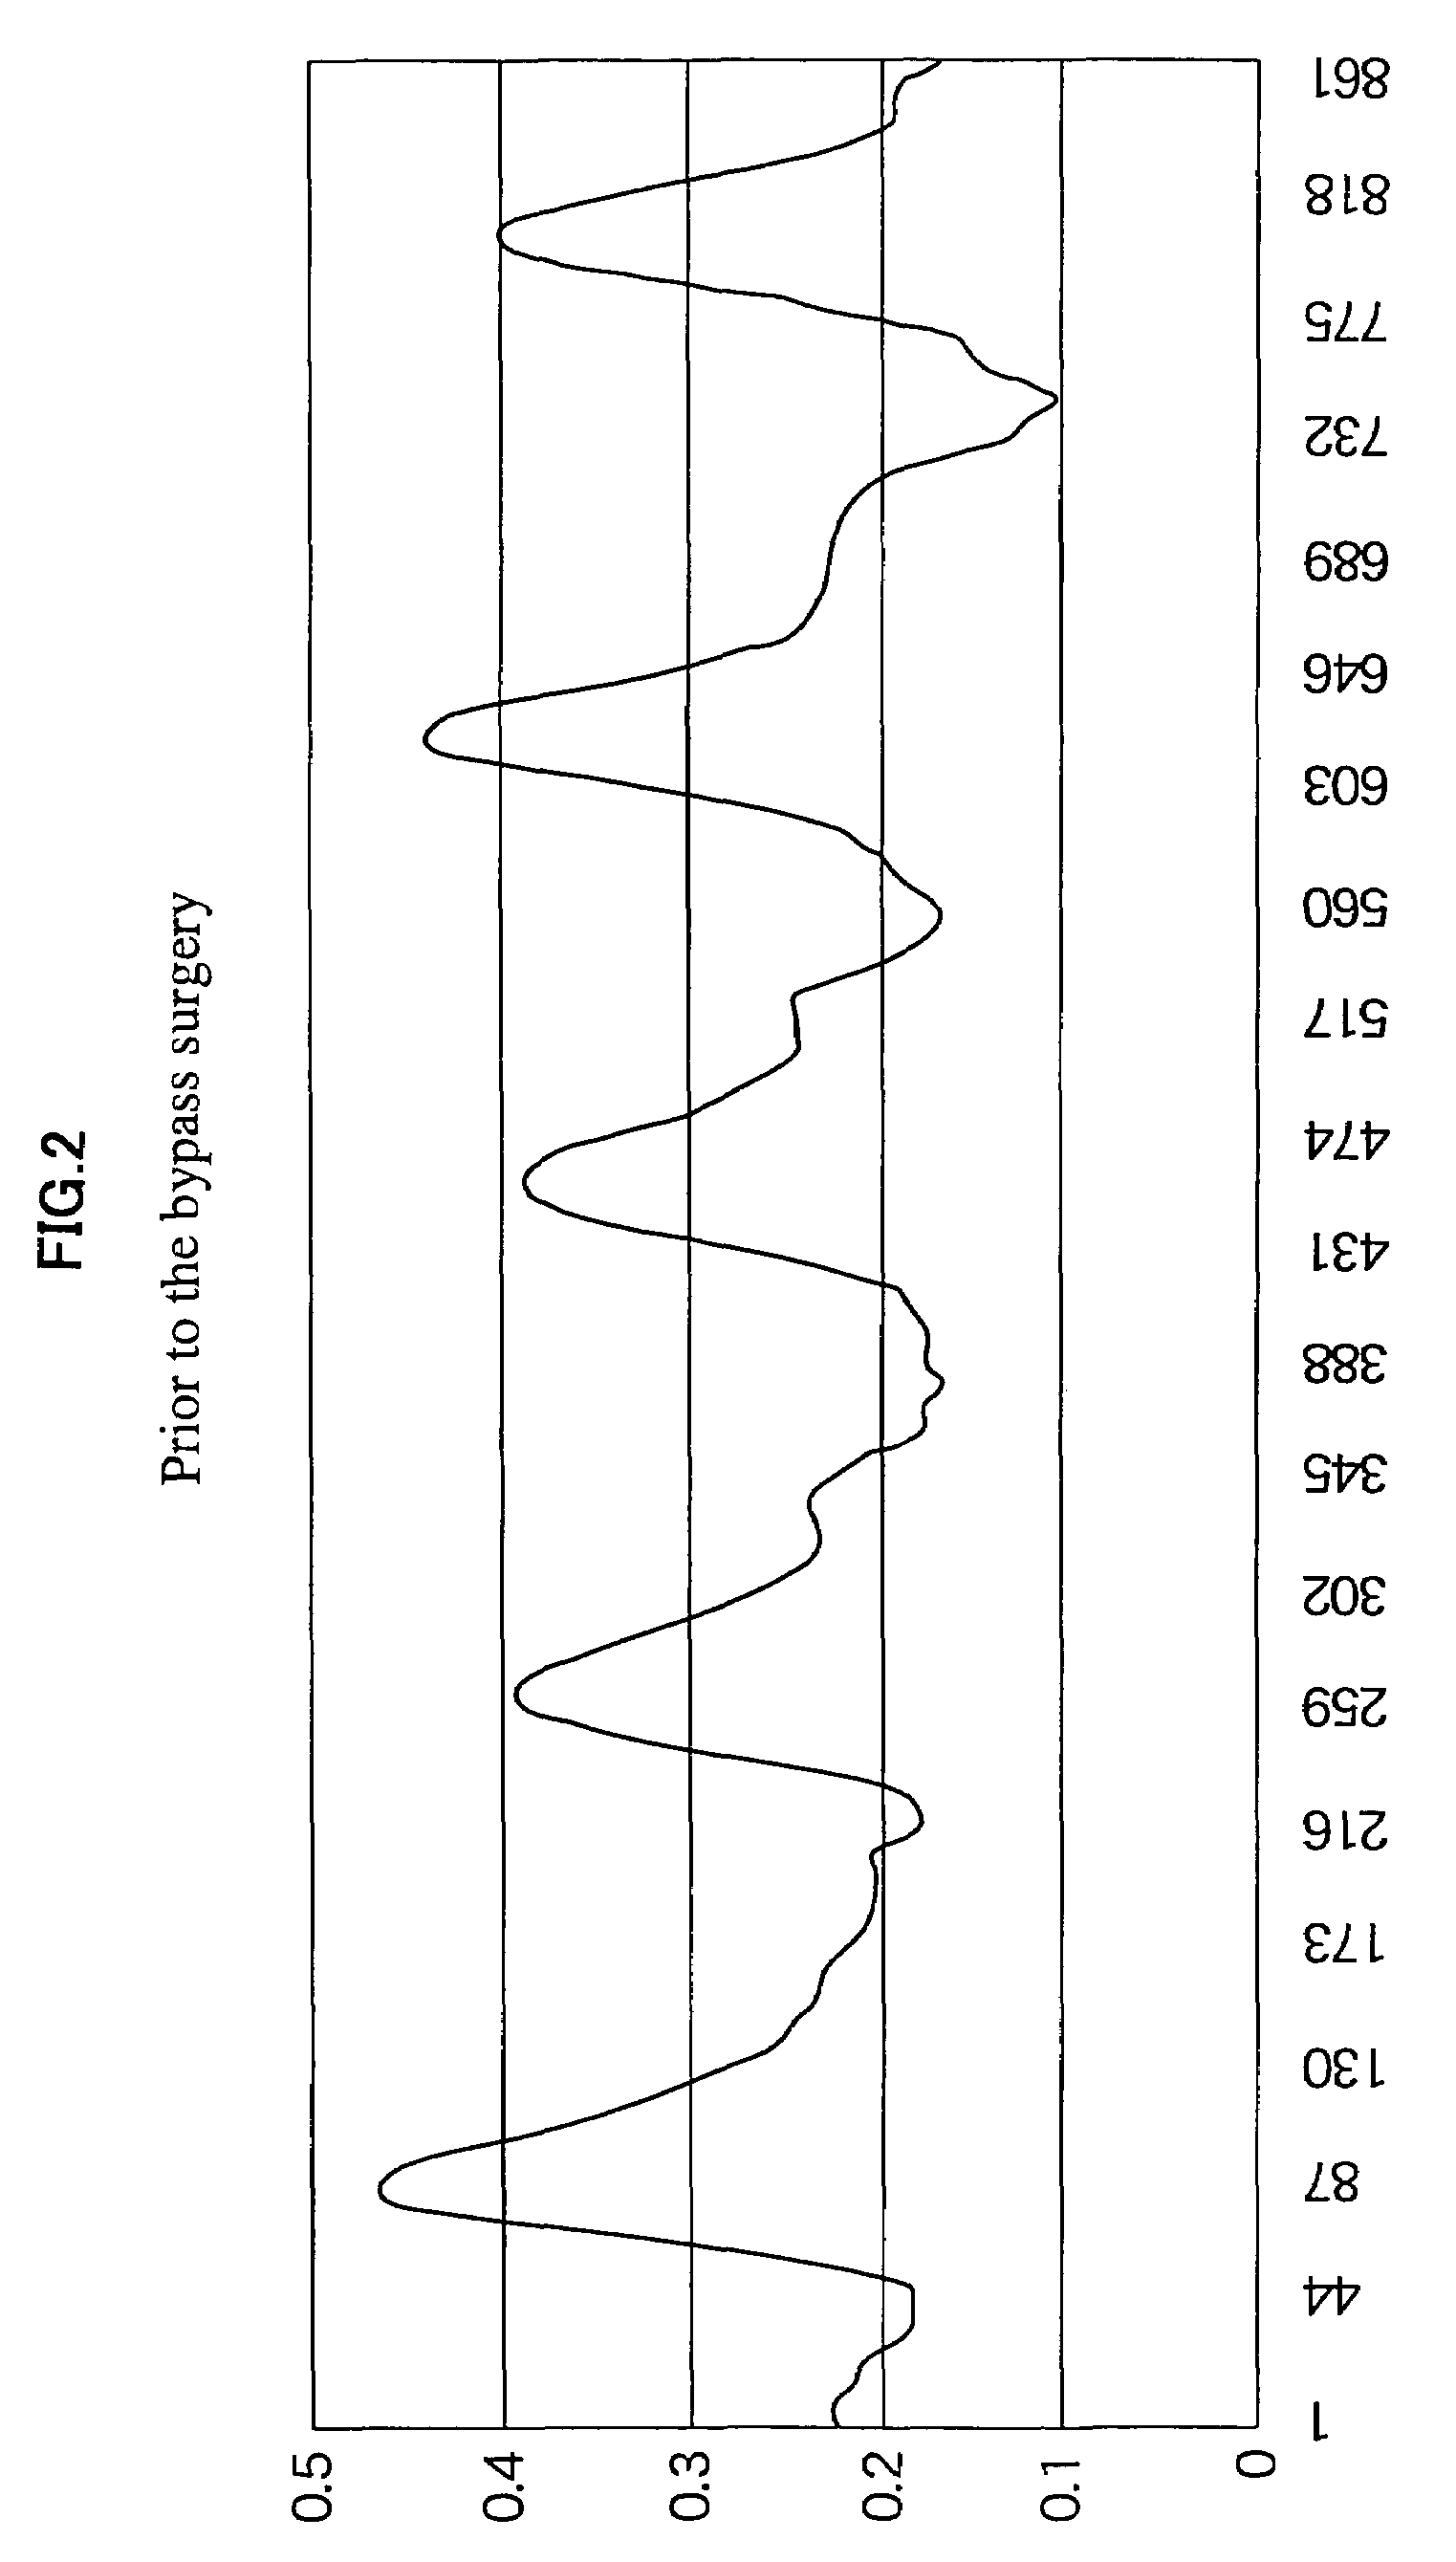 Vascular disease examining system and bypass vascular diagnosing device